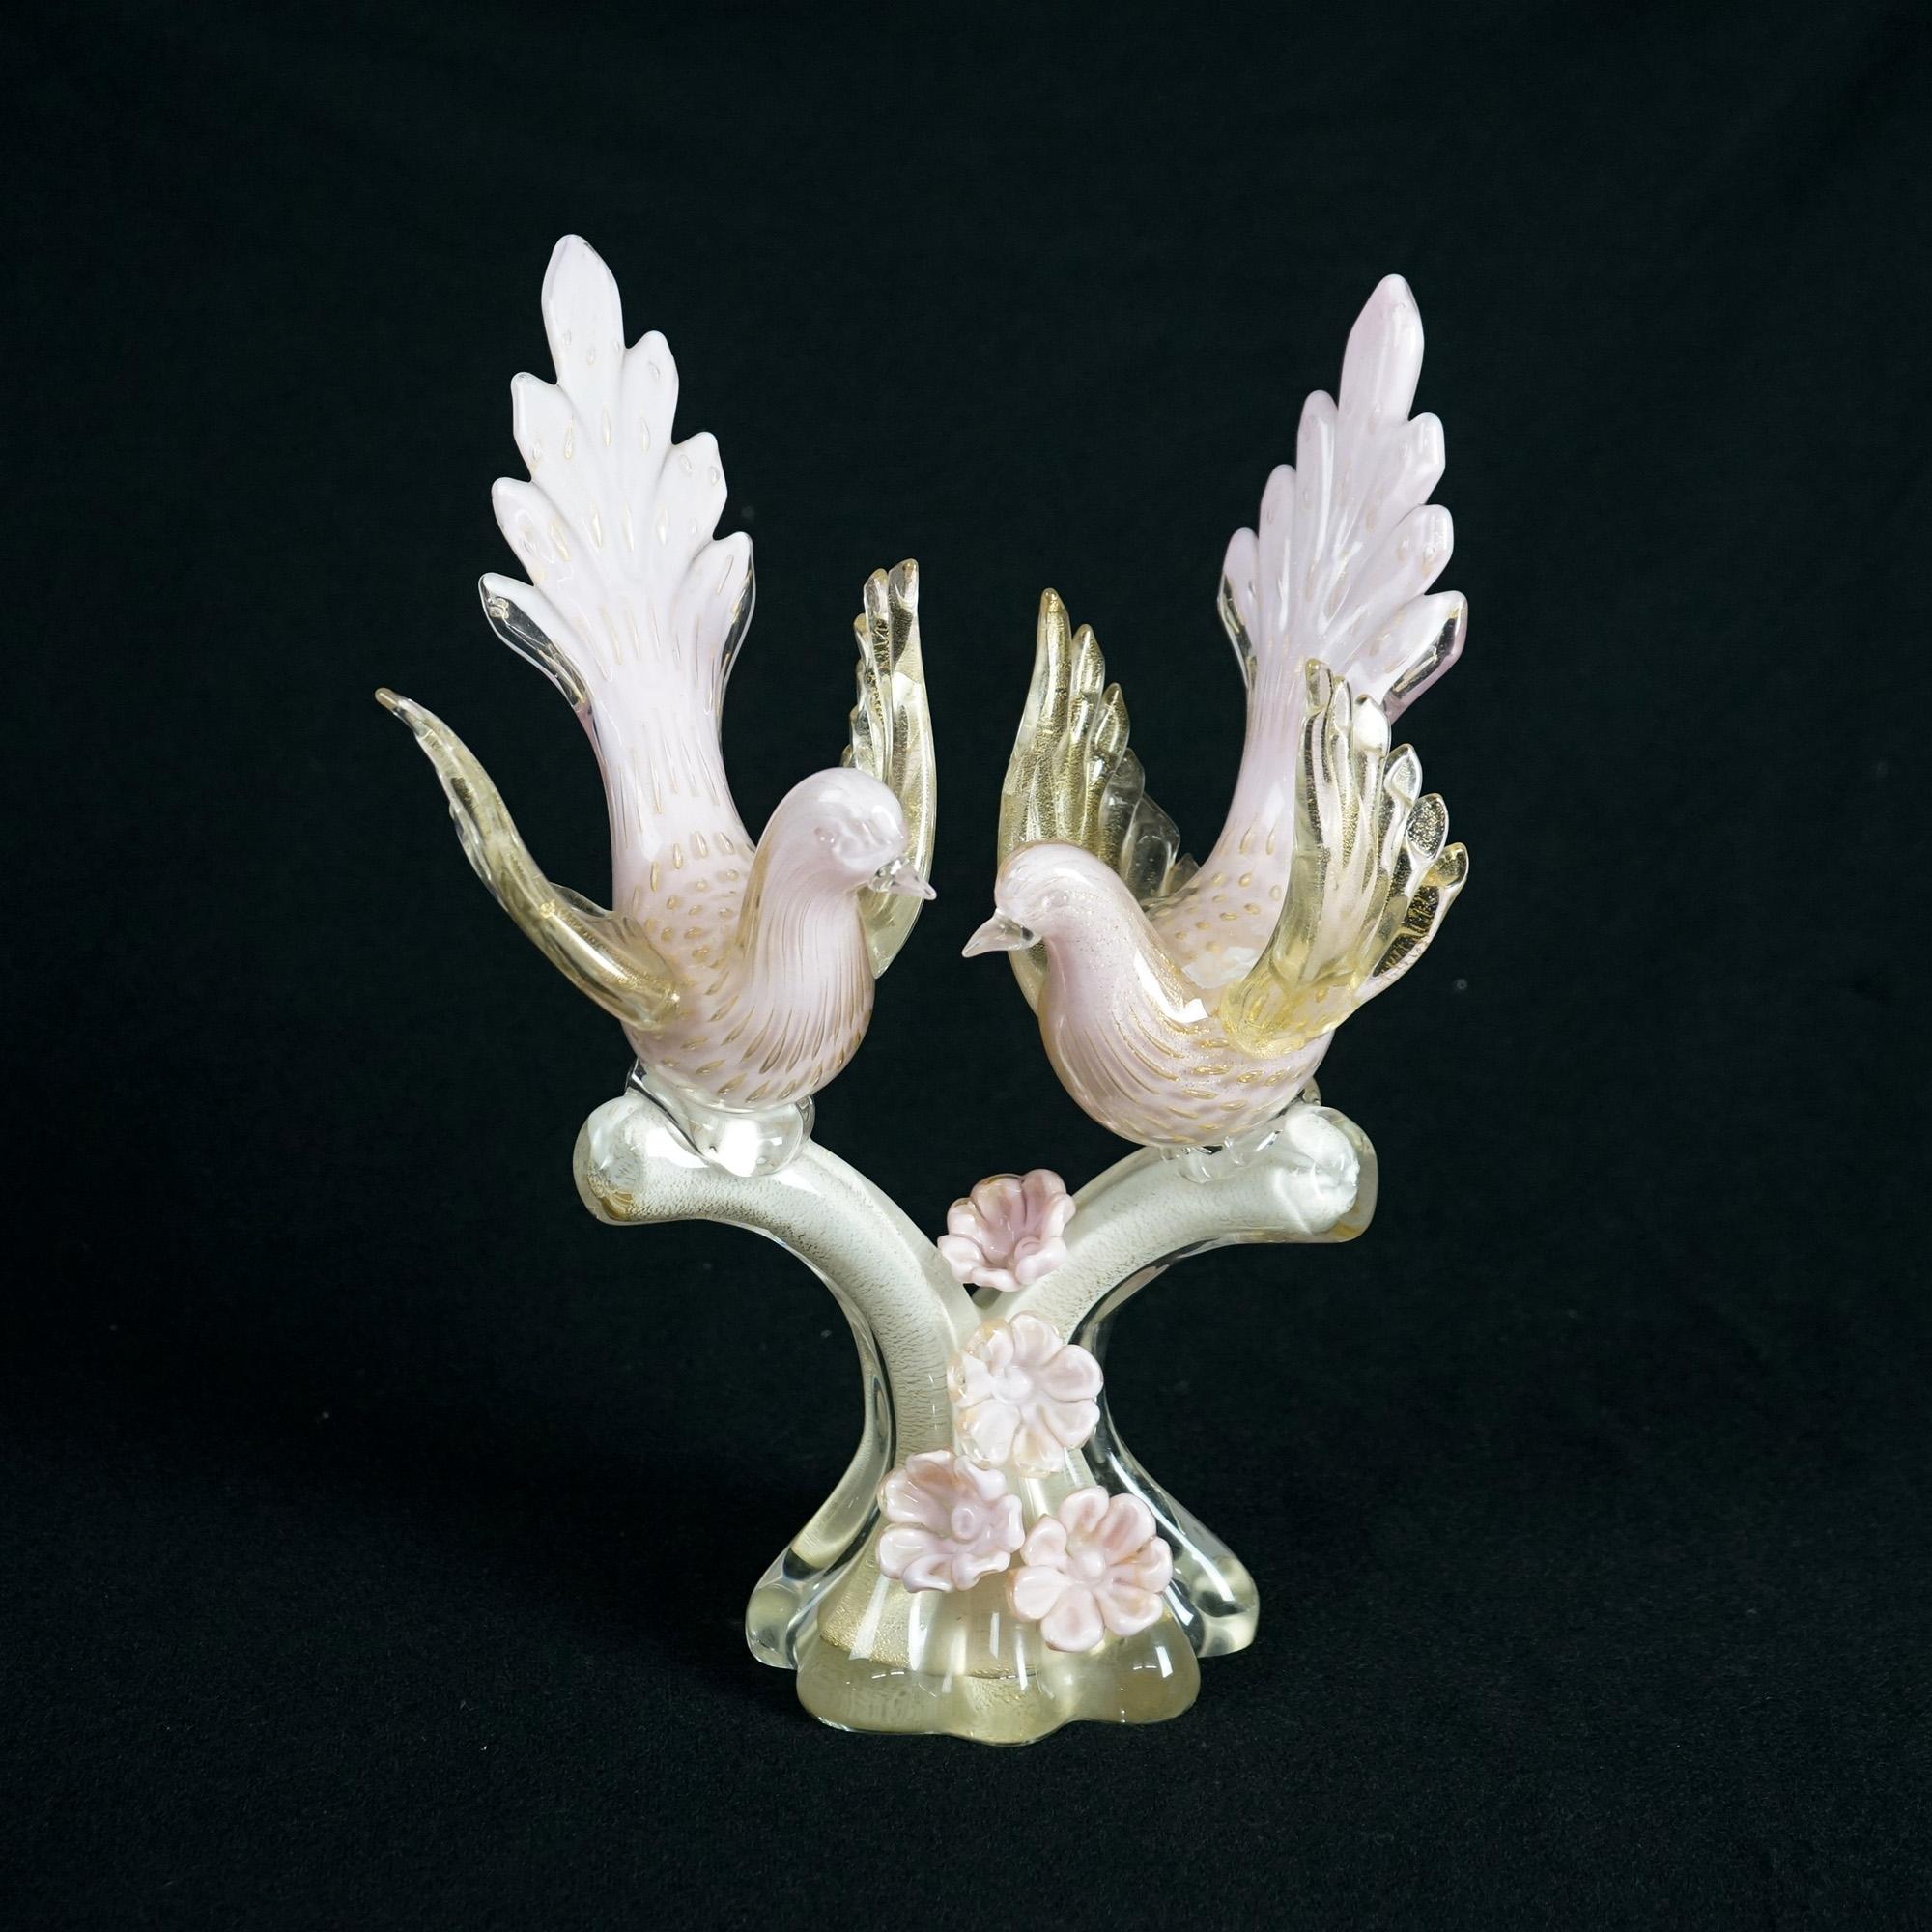 An Italian Venetian Murano wedding sculpture offers art glass construction with two lovebirds on tree, gold highlights throughout, c1950

Measures- 13.75''H x 10.25''W x 10''D